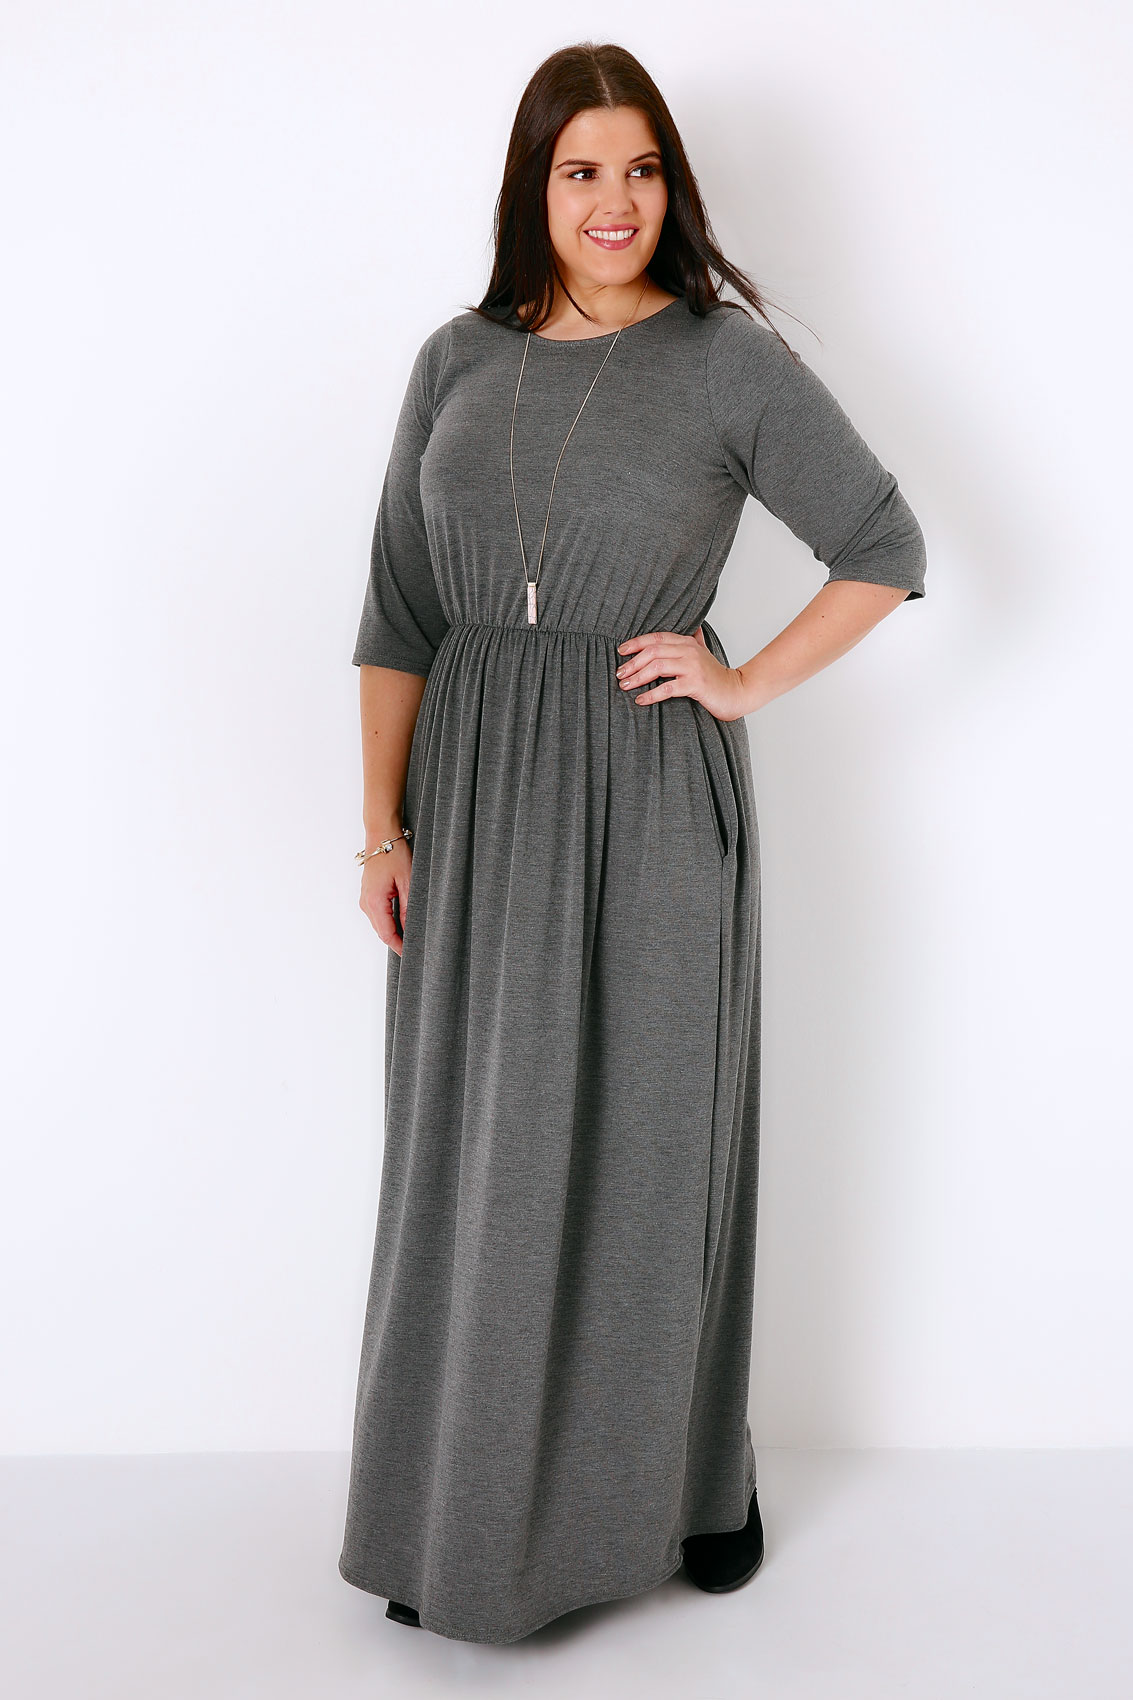 Charcoal Grey Jersey Maxi Dress With Ruched Waist, Plus size 16 to 32